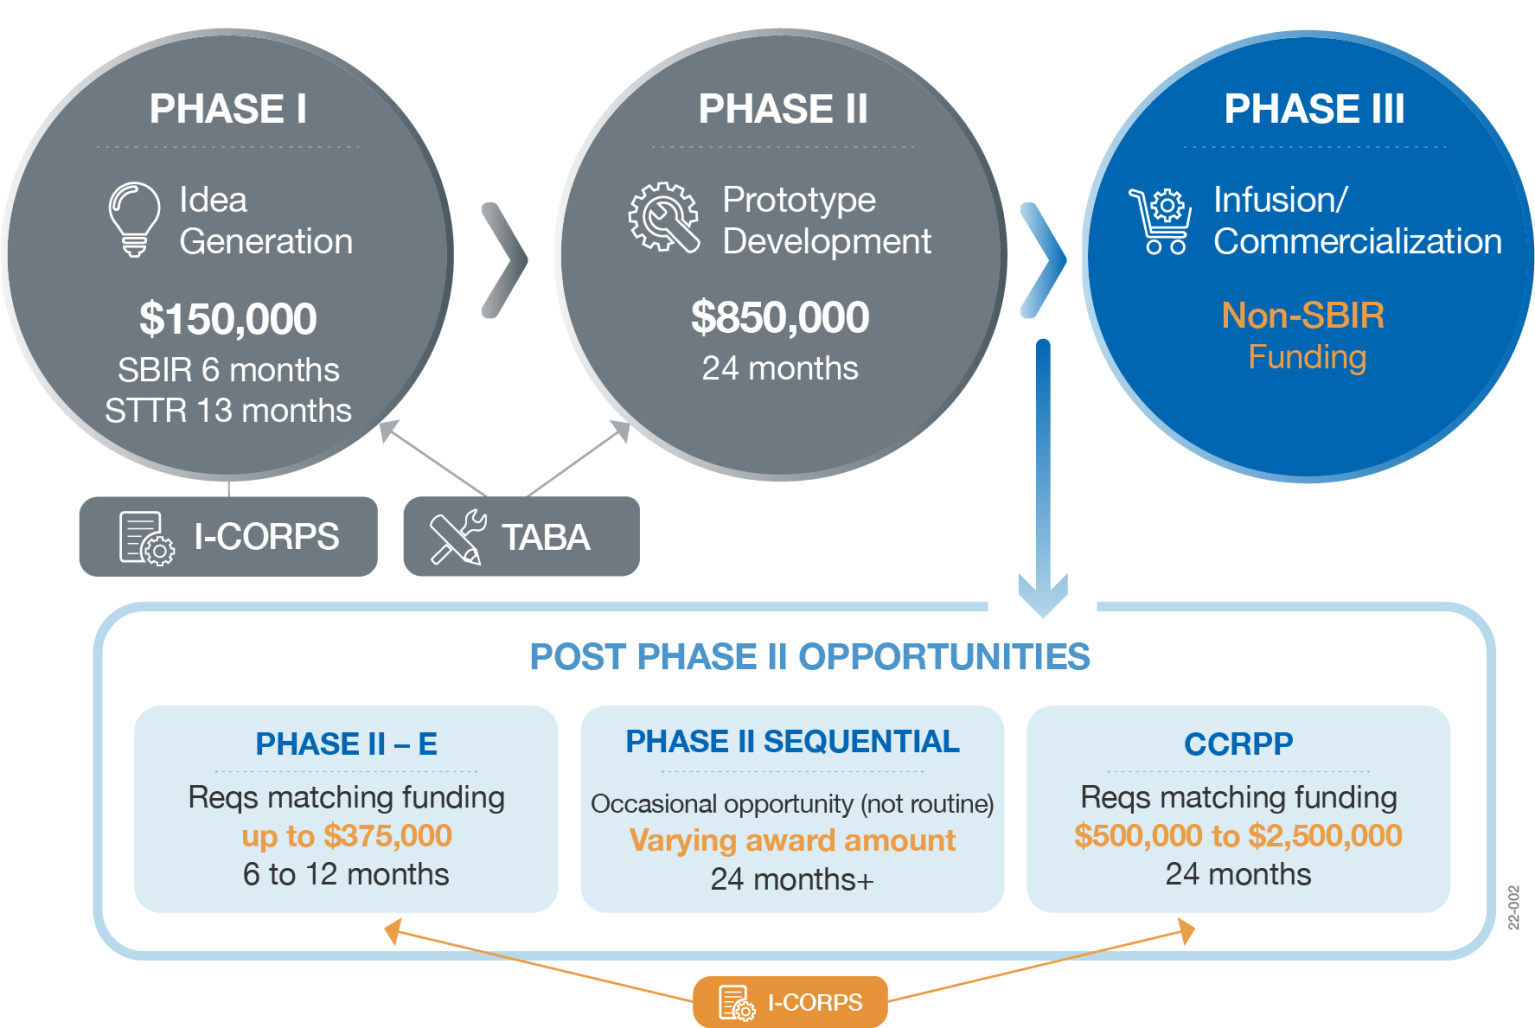 The opportunities offered by the NASA SBIR/STTR program, represented by three circles for Phase I, Phase II, and Phase III, with three rectangles under representing the Post Phase II Opportunities